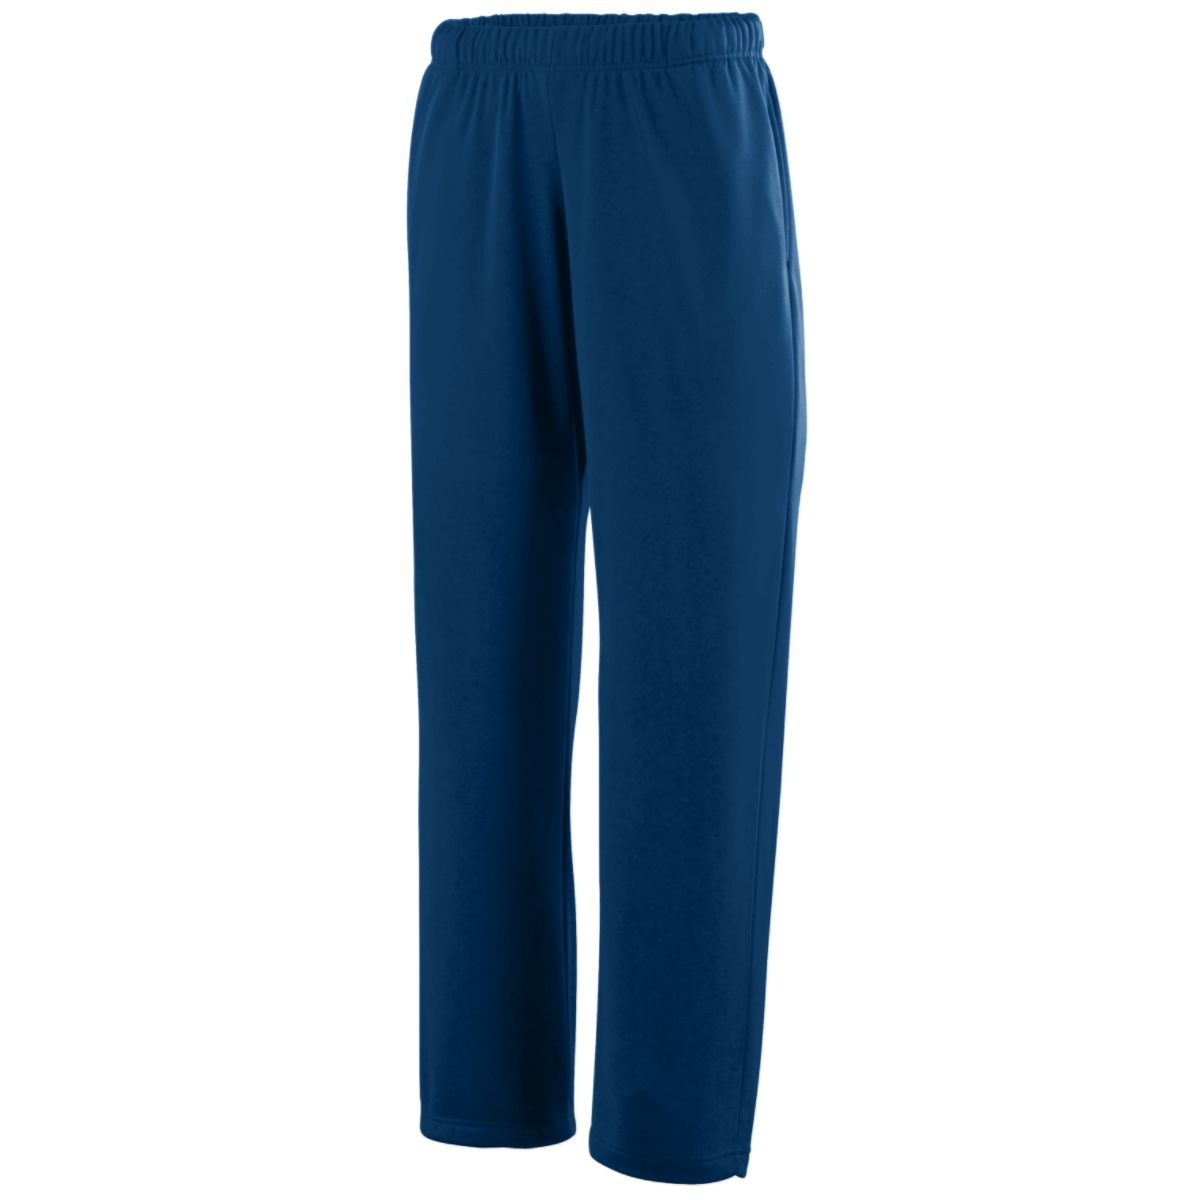 Augusta Sportswear Wicking Fleece Sweatpant in Navy  -Part of the Adult, Adult-Pants, Pants, Augusta-Products product lines at KanaleyCreations.com